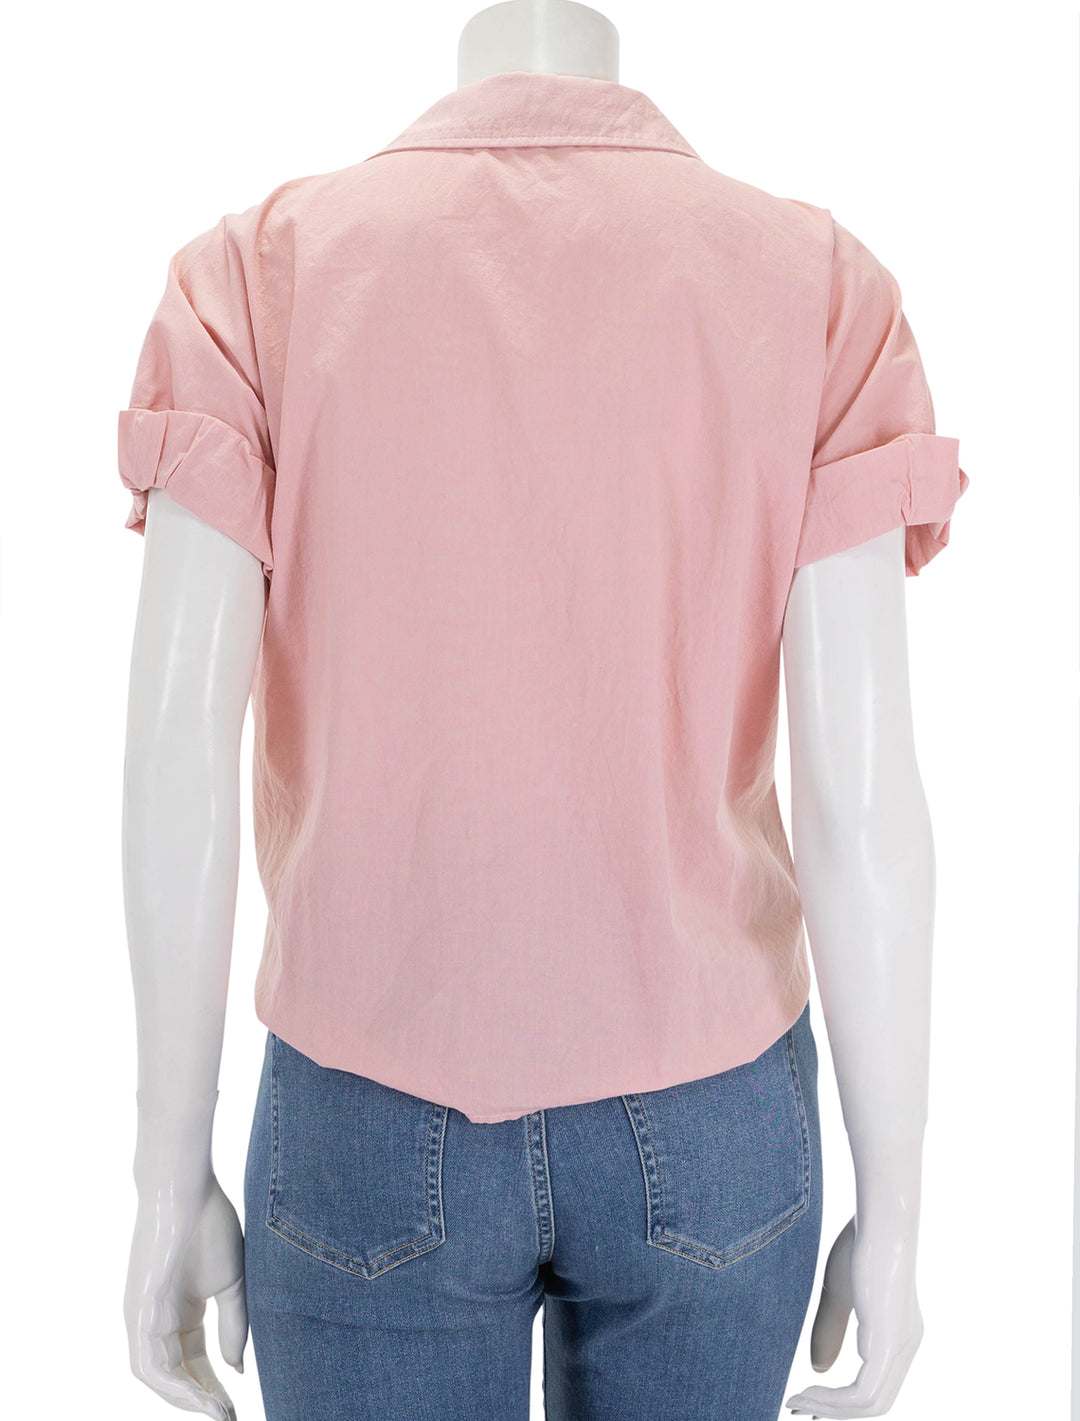 Back view of Stateside's voile s/s twist front shirt in lipstick pink.